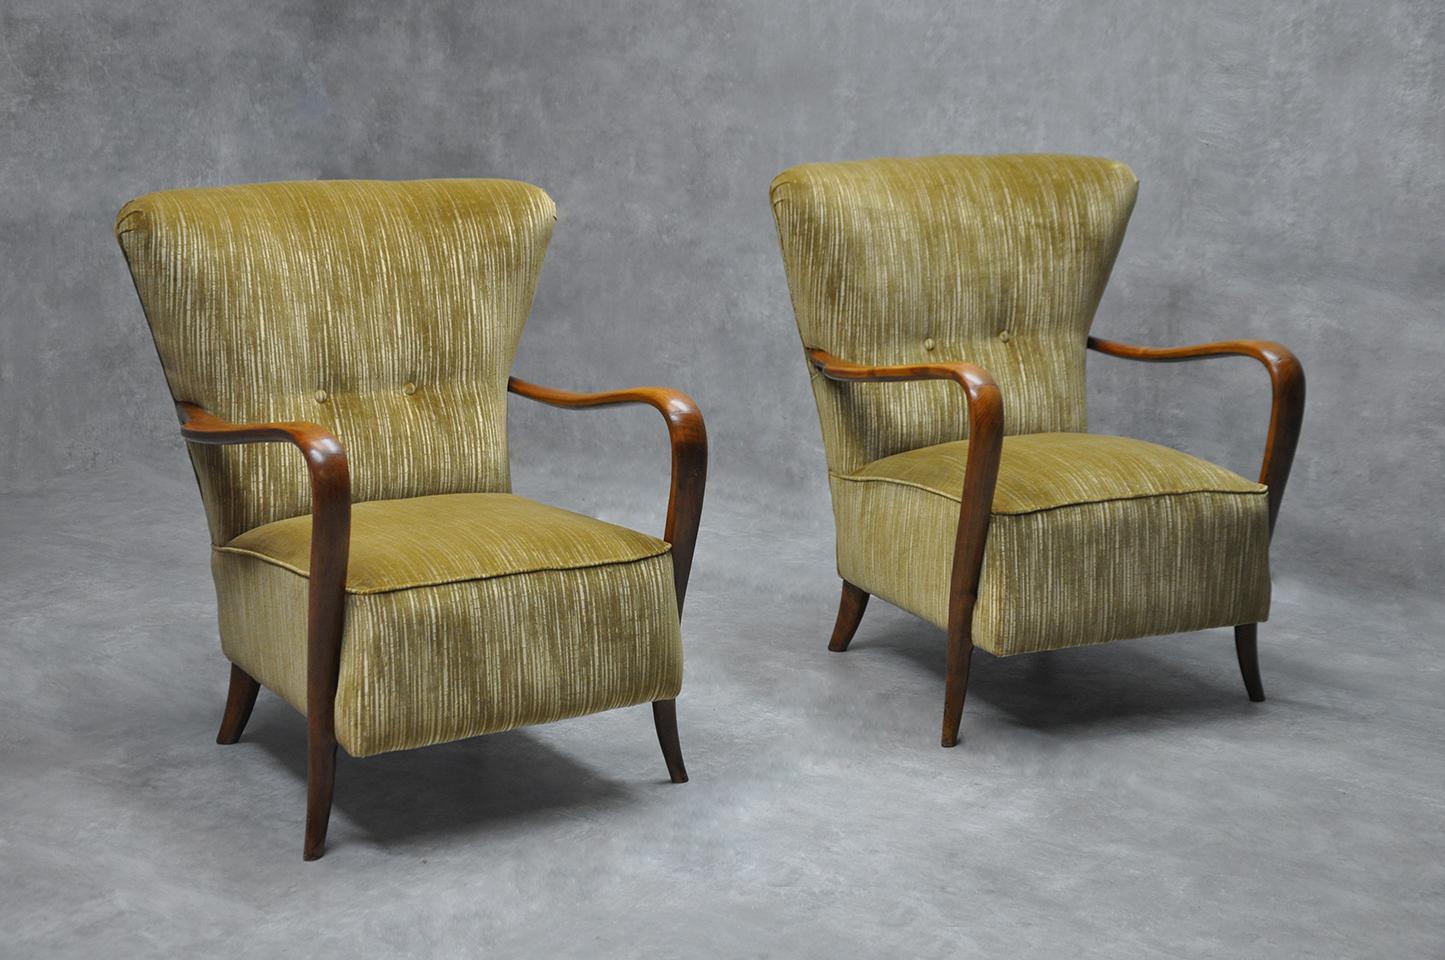 Set of two 1950s armchairs with wooden structure newly upholstered.